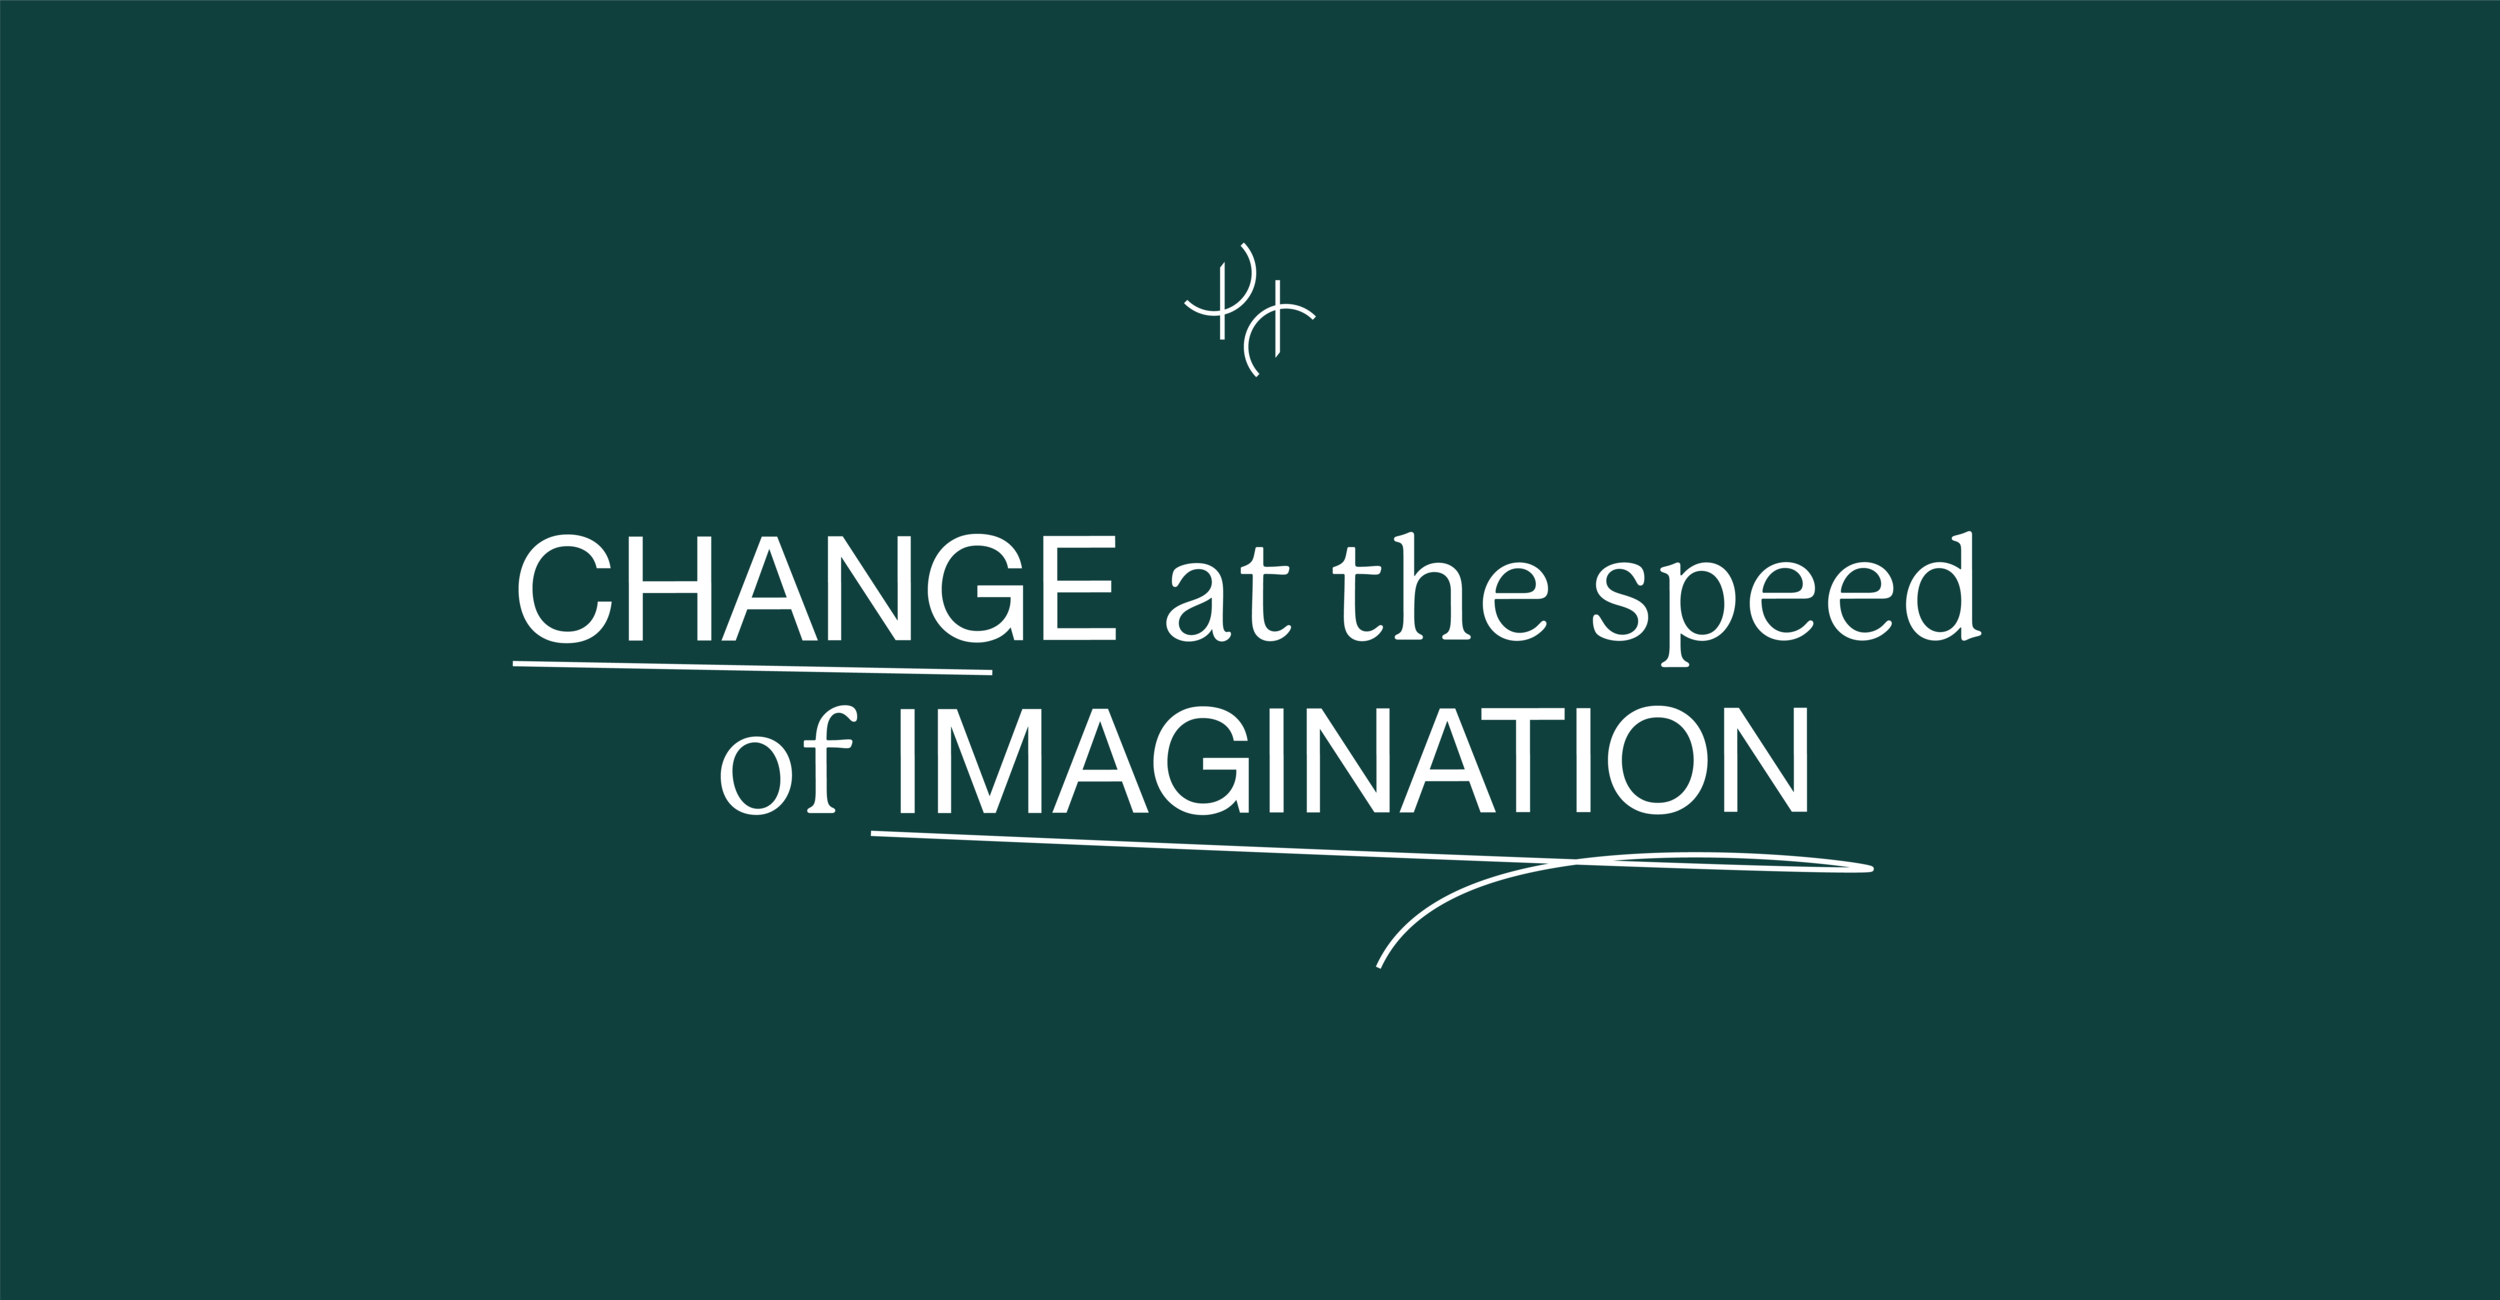 Change+at+the+speed+of+imagination-05.png